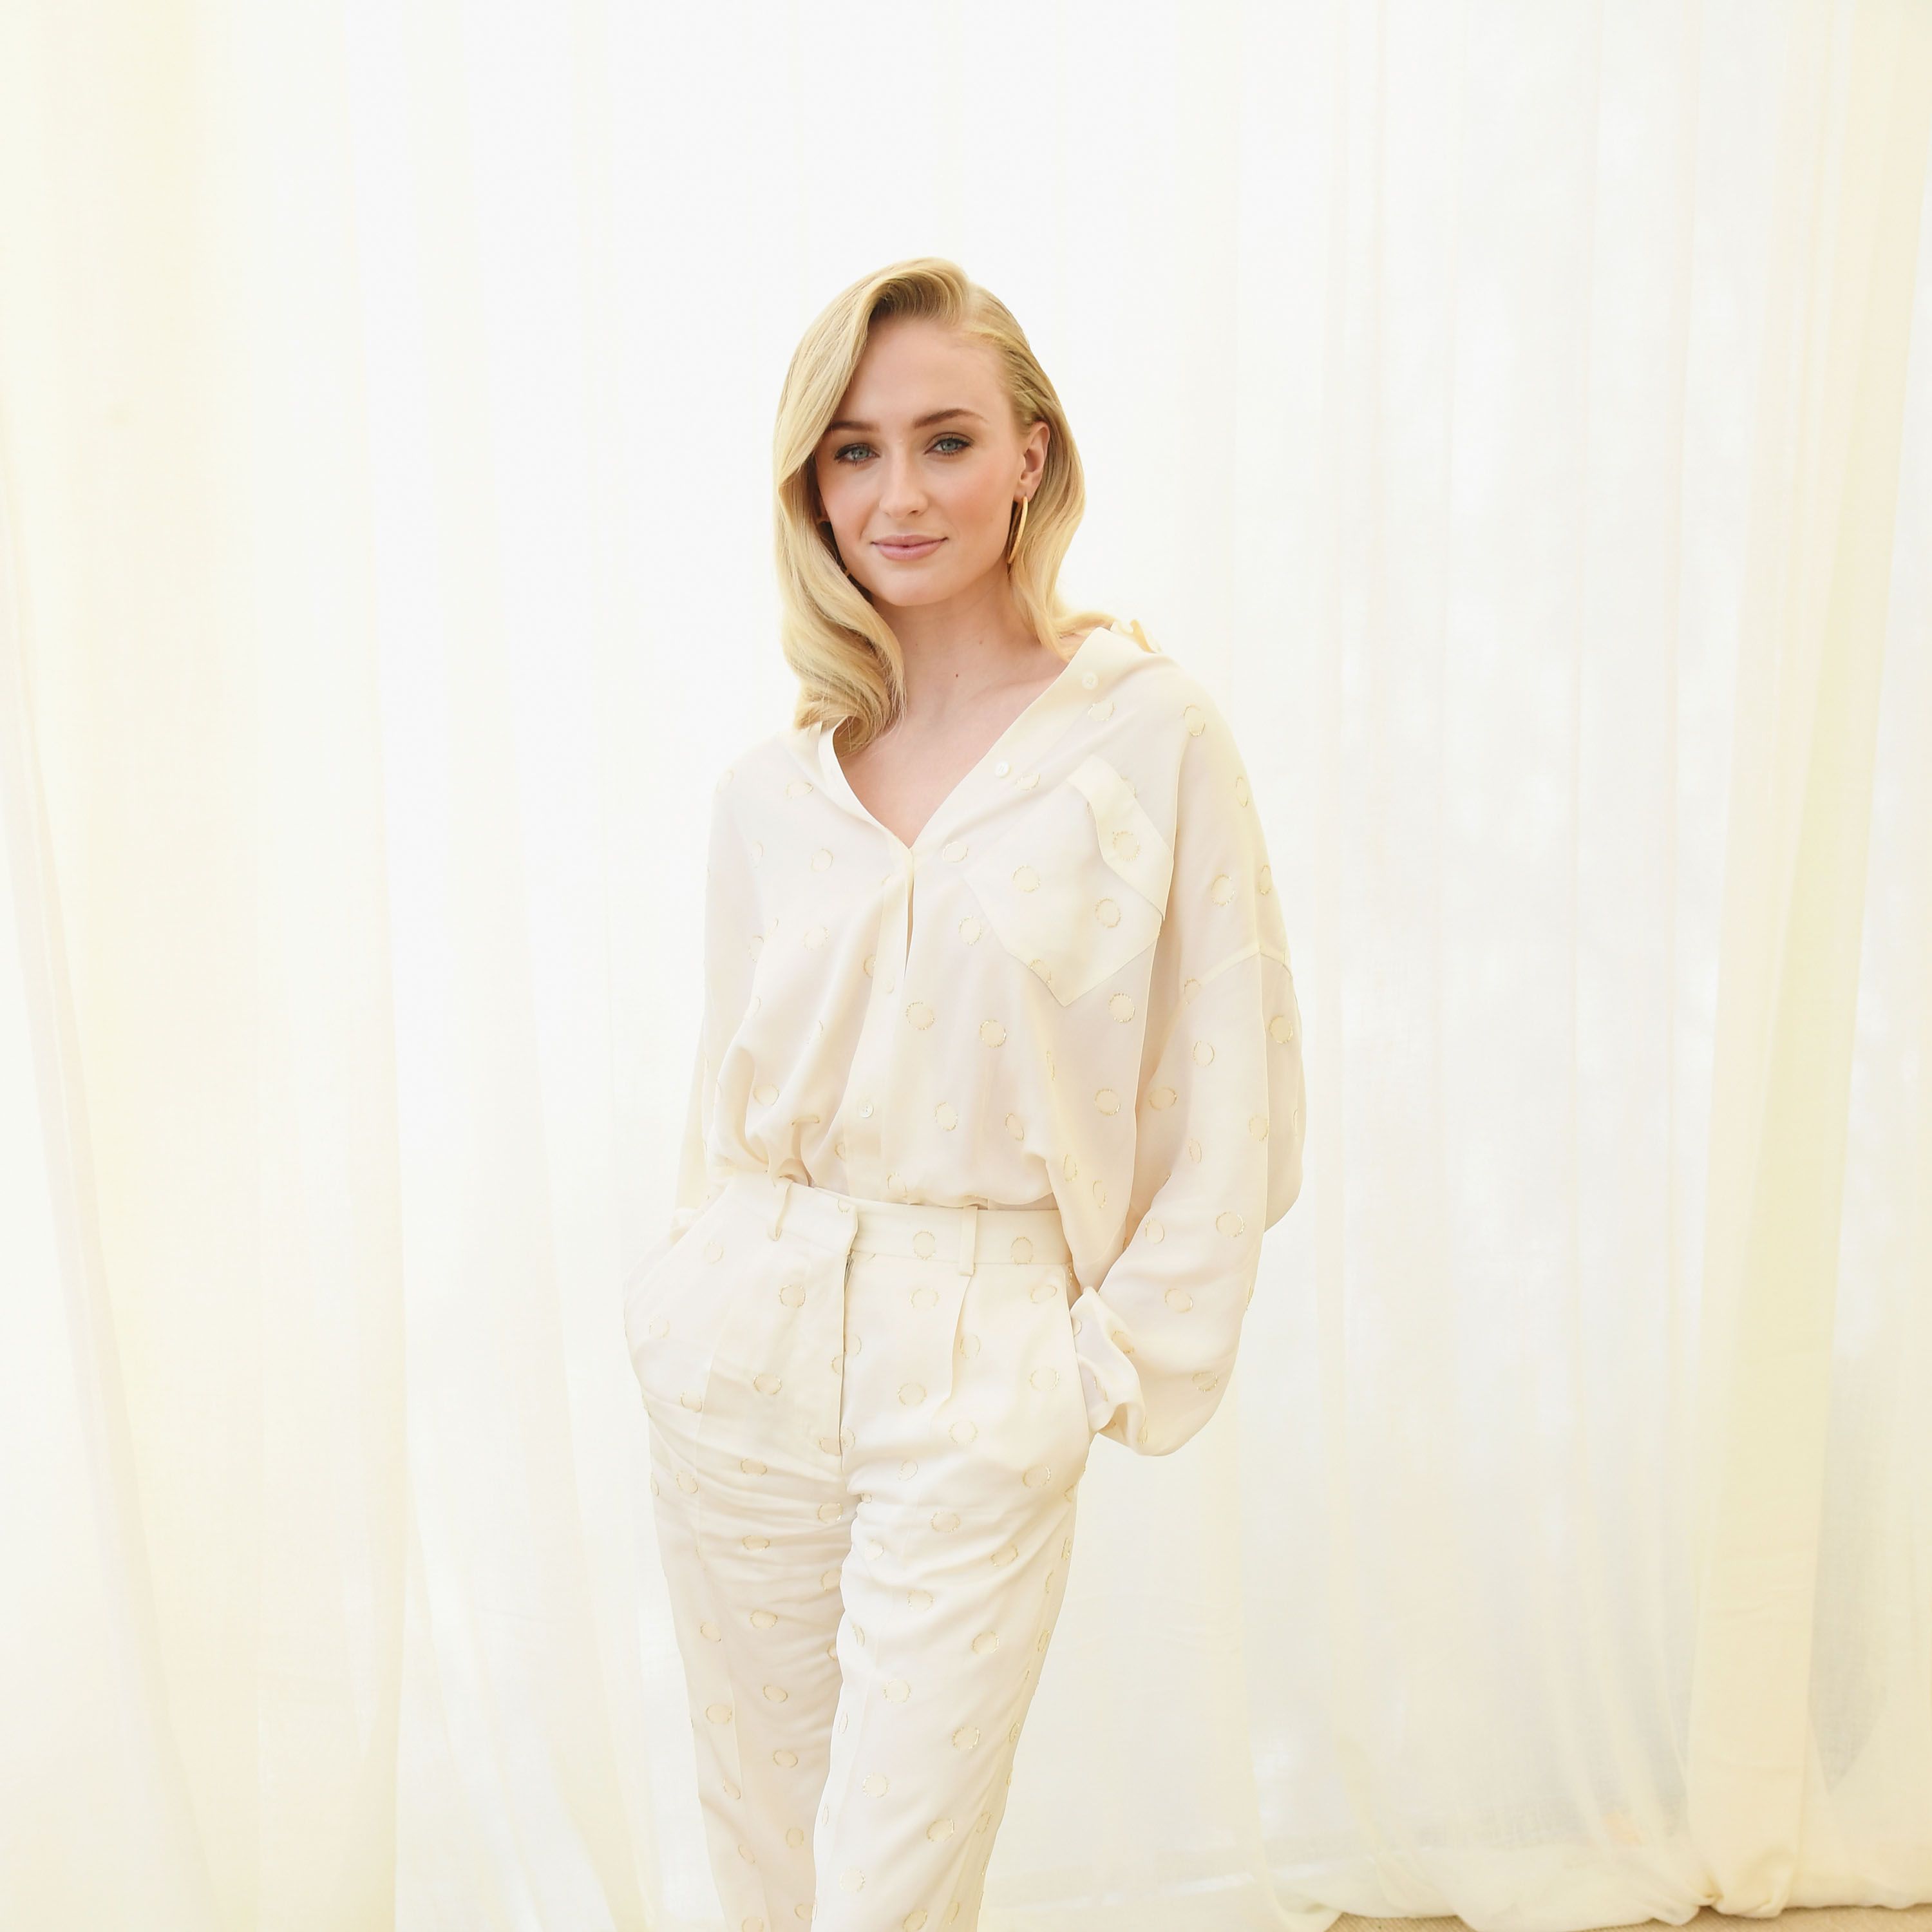 Sophie Turner Wore a Minimal White Dress to Her Pre-Wedding Party